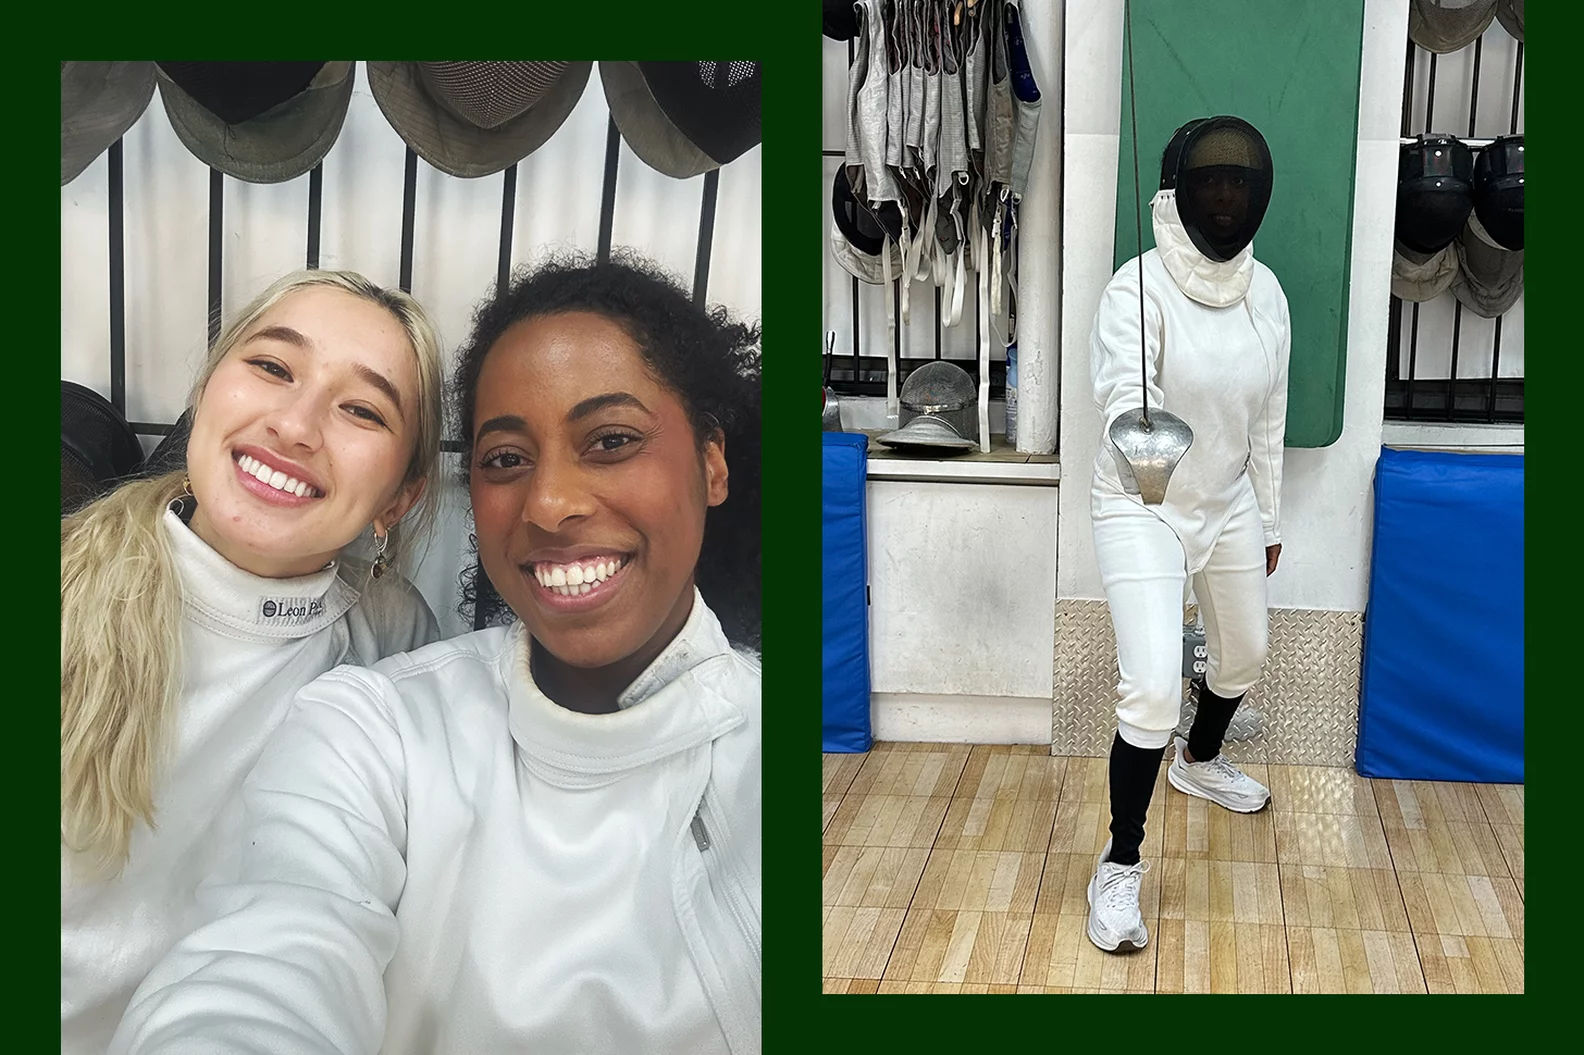 Kendis trains to be an Olympic fencer